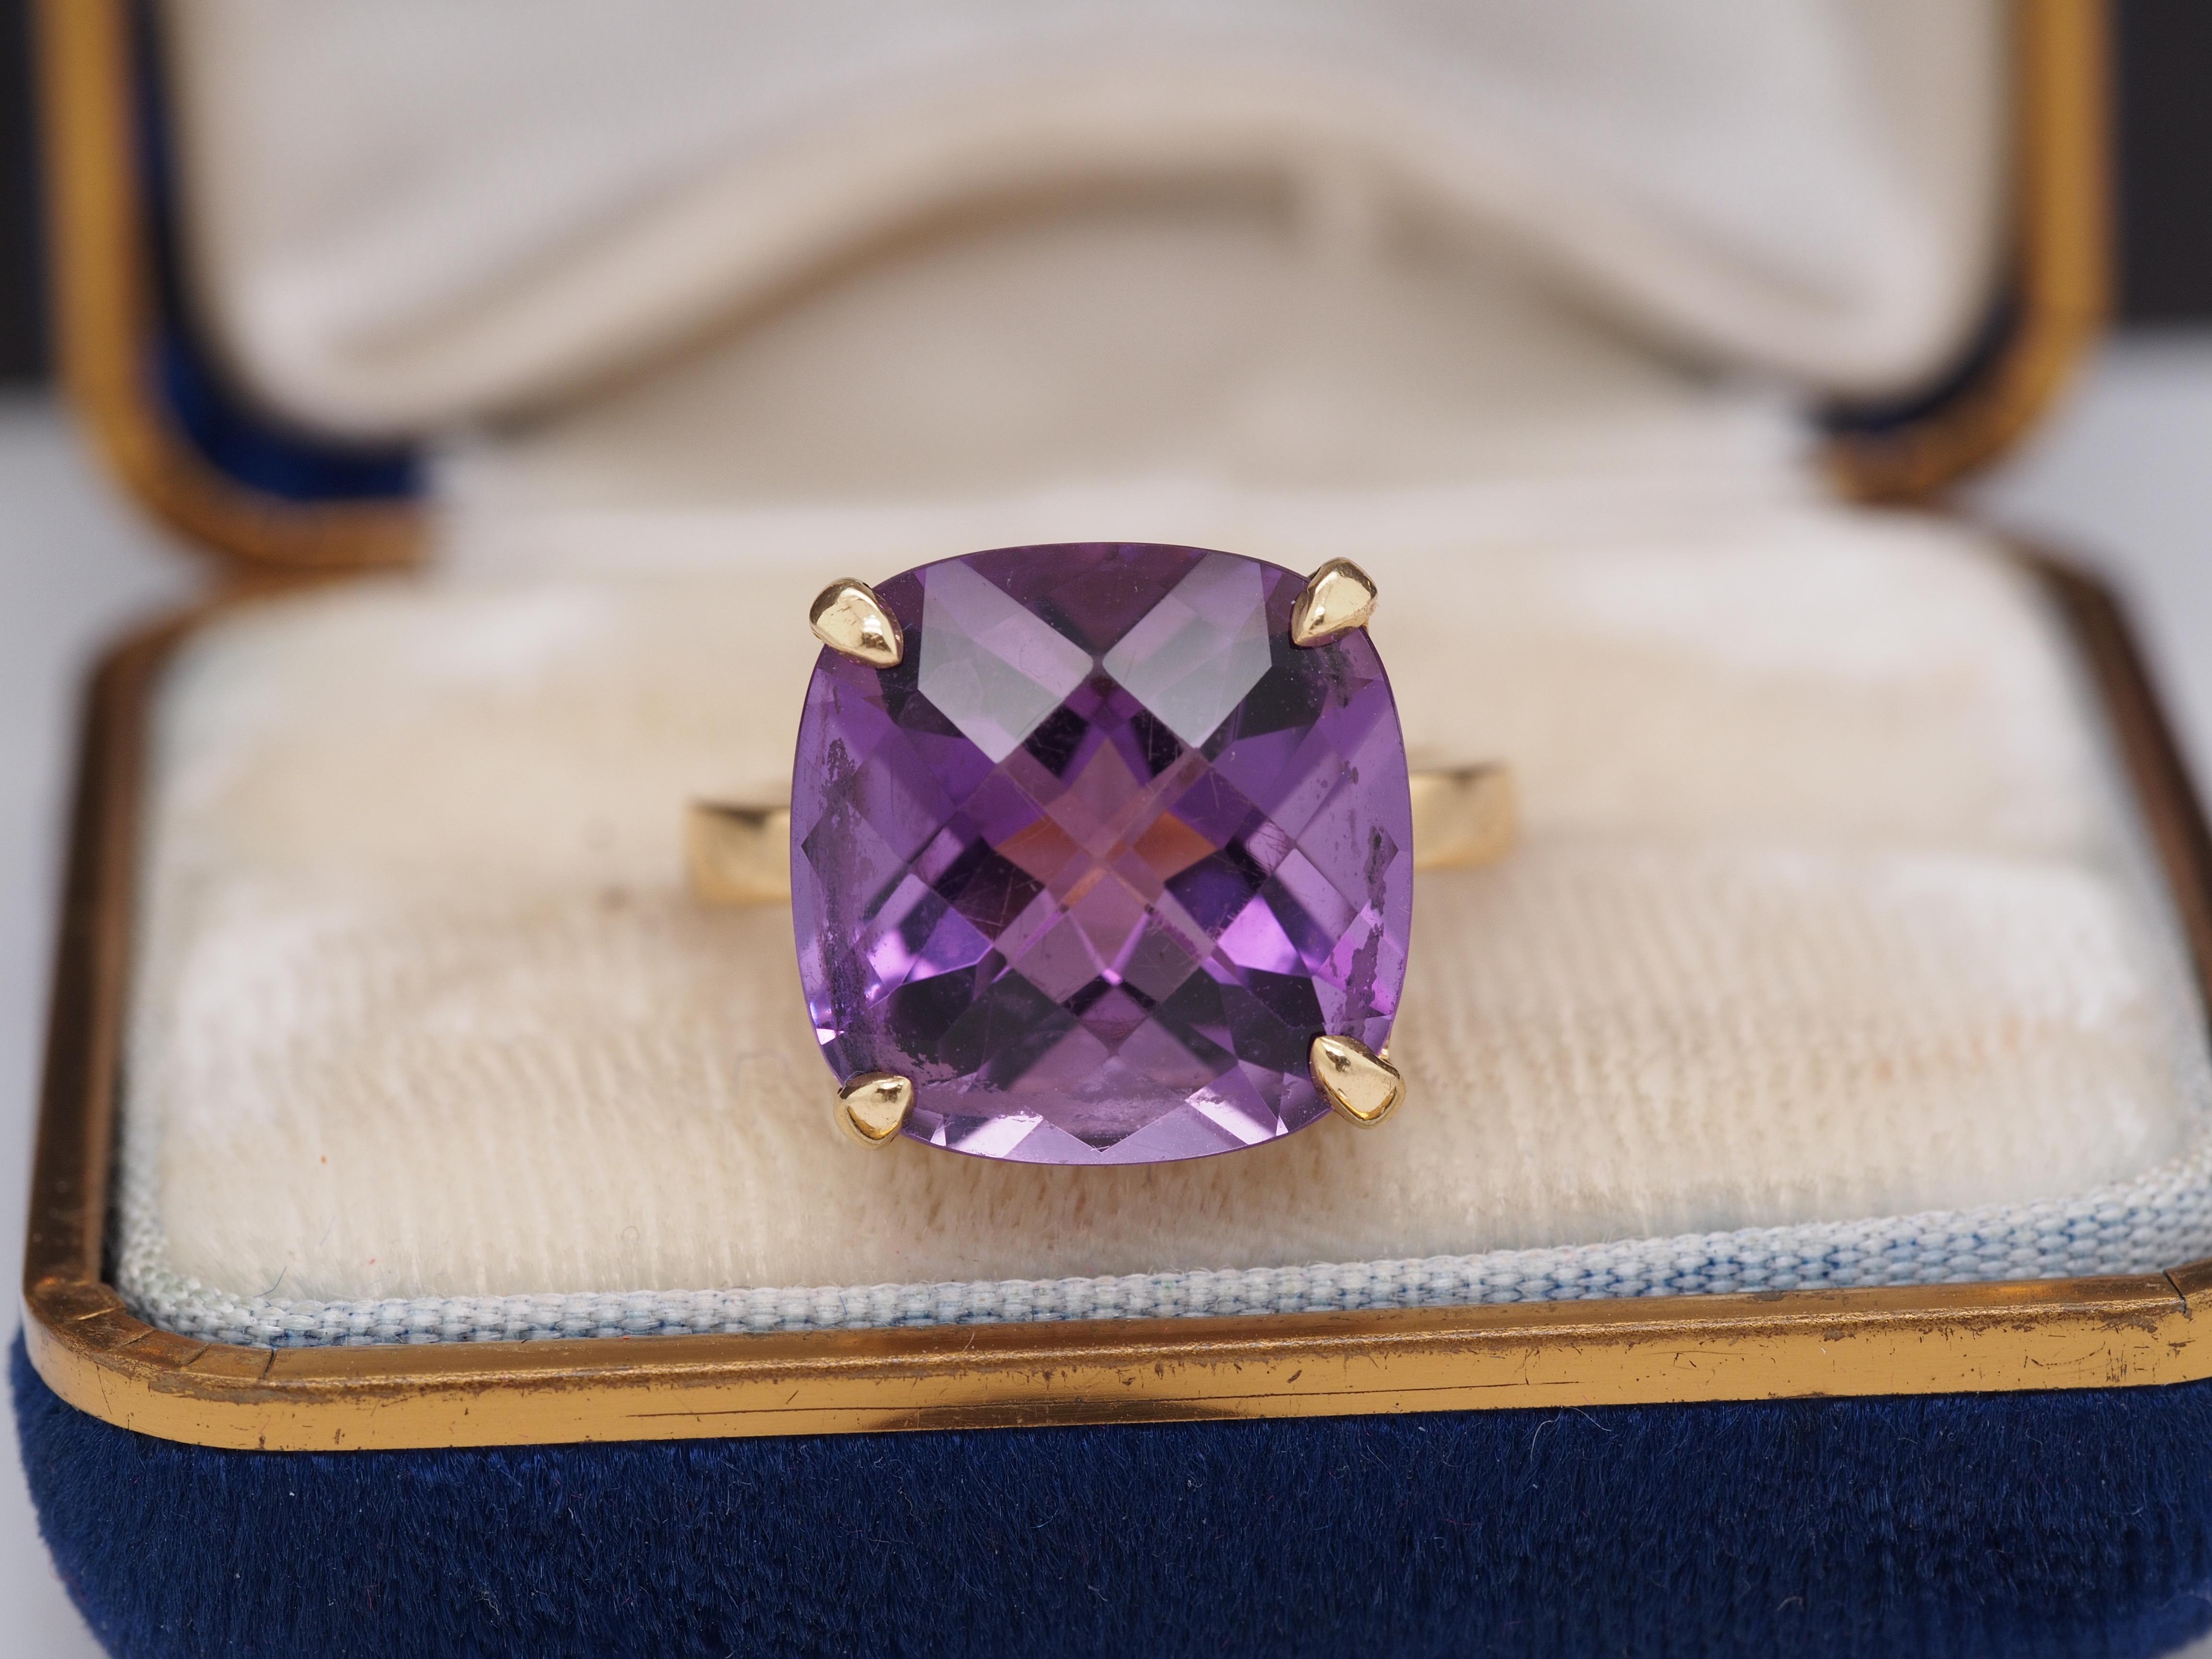 Year: 2000s
Item Details:
Ring Size: 6.25
Metal Type: 18K Yellow Gold [Hallmarked, and Tested]
Weight: 7.5 grams
Center Amethyst: 14mm x 14mm, Purple Amethyst
Band Width: 2.5mm
Condition: Excellent